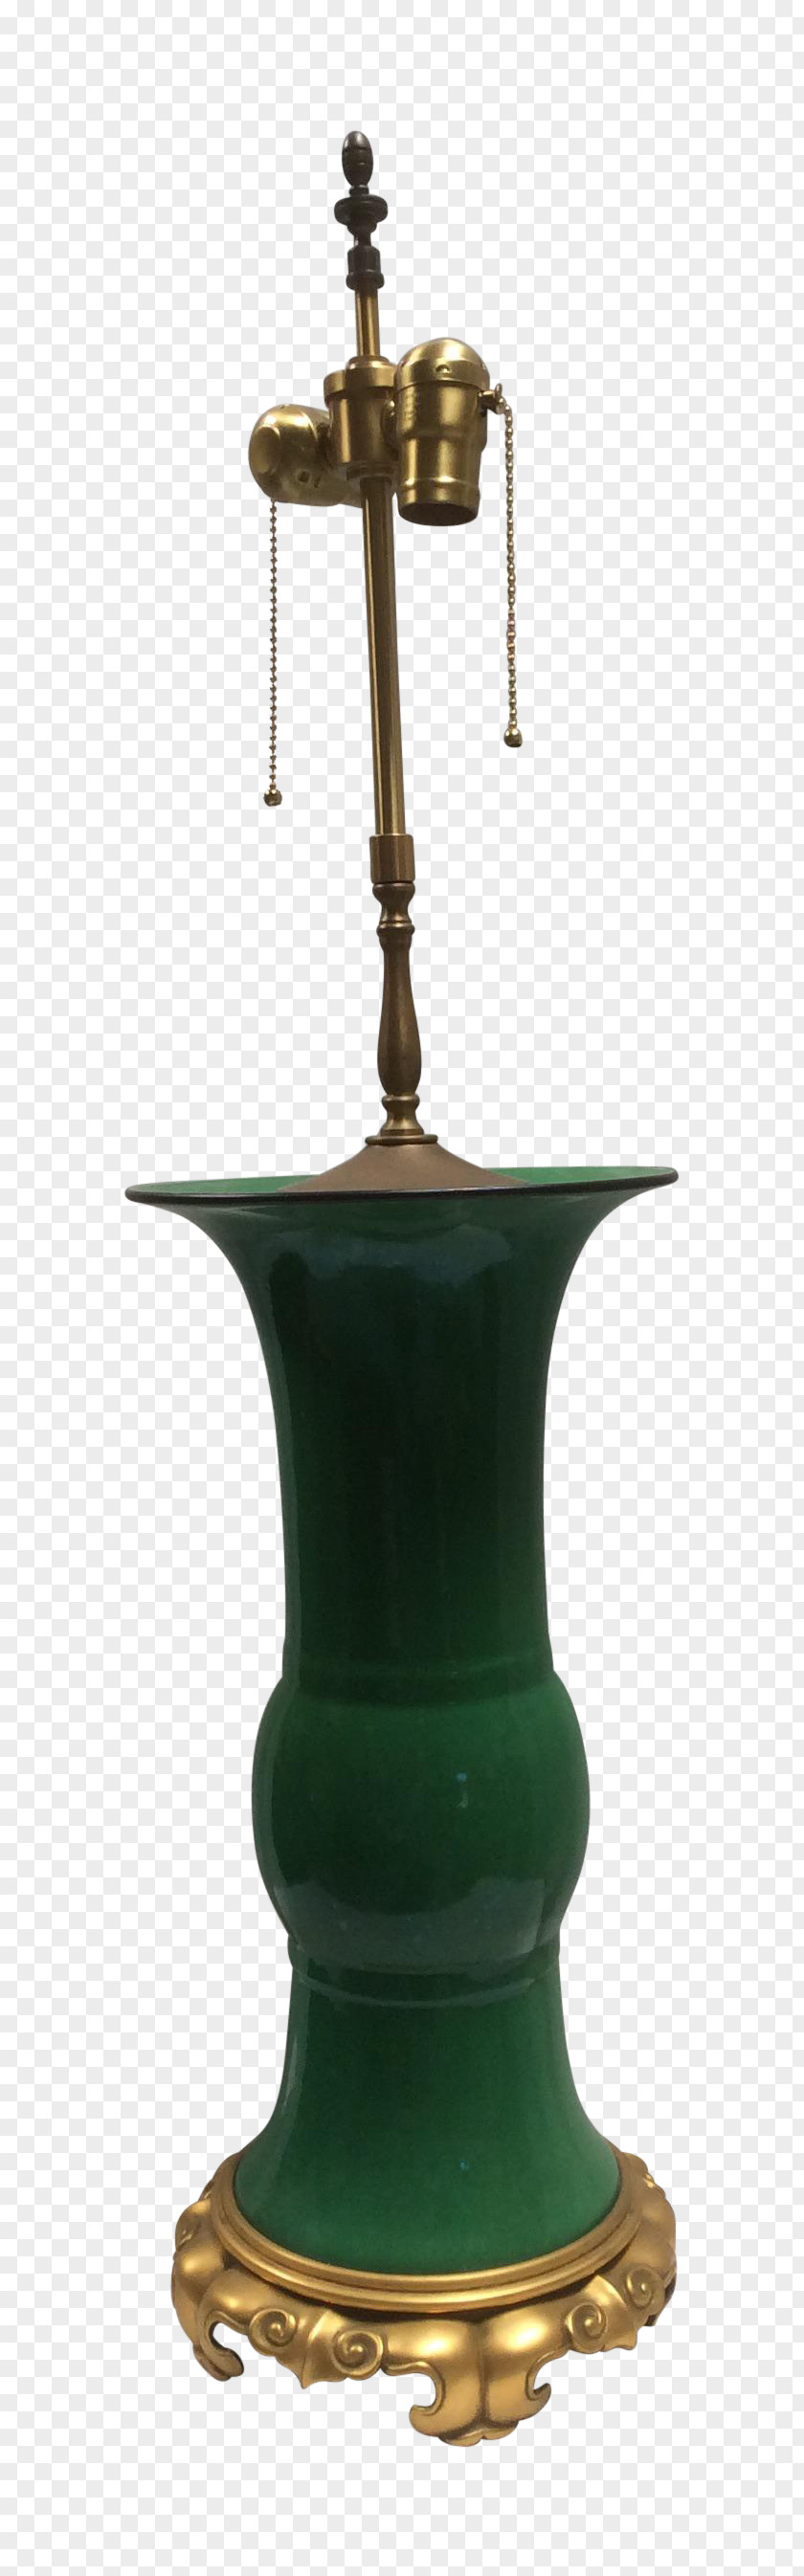 Chinese Porcelain Green Chairish Furniture Emerald Table PNG